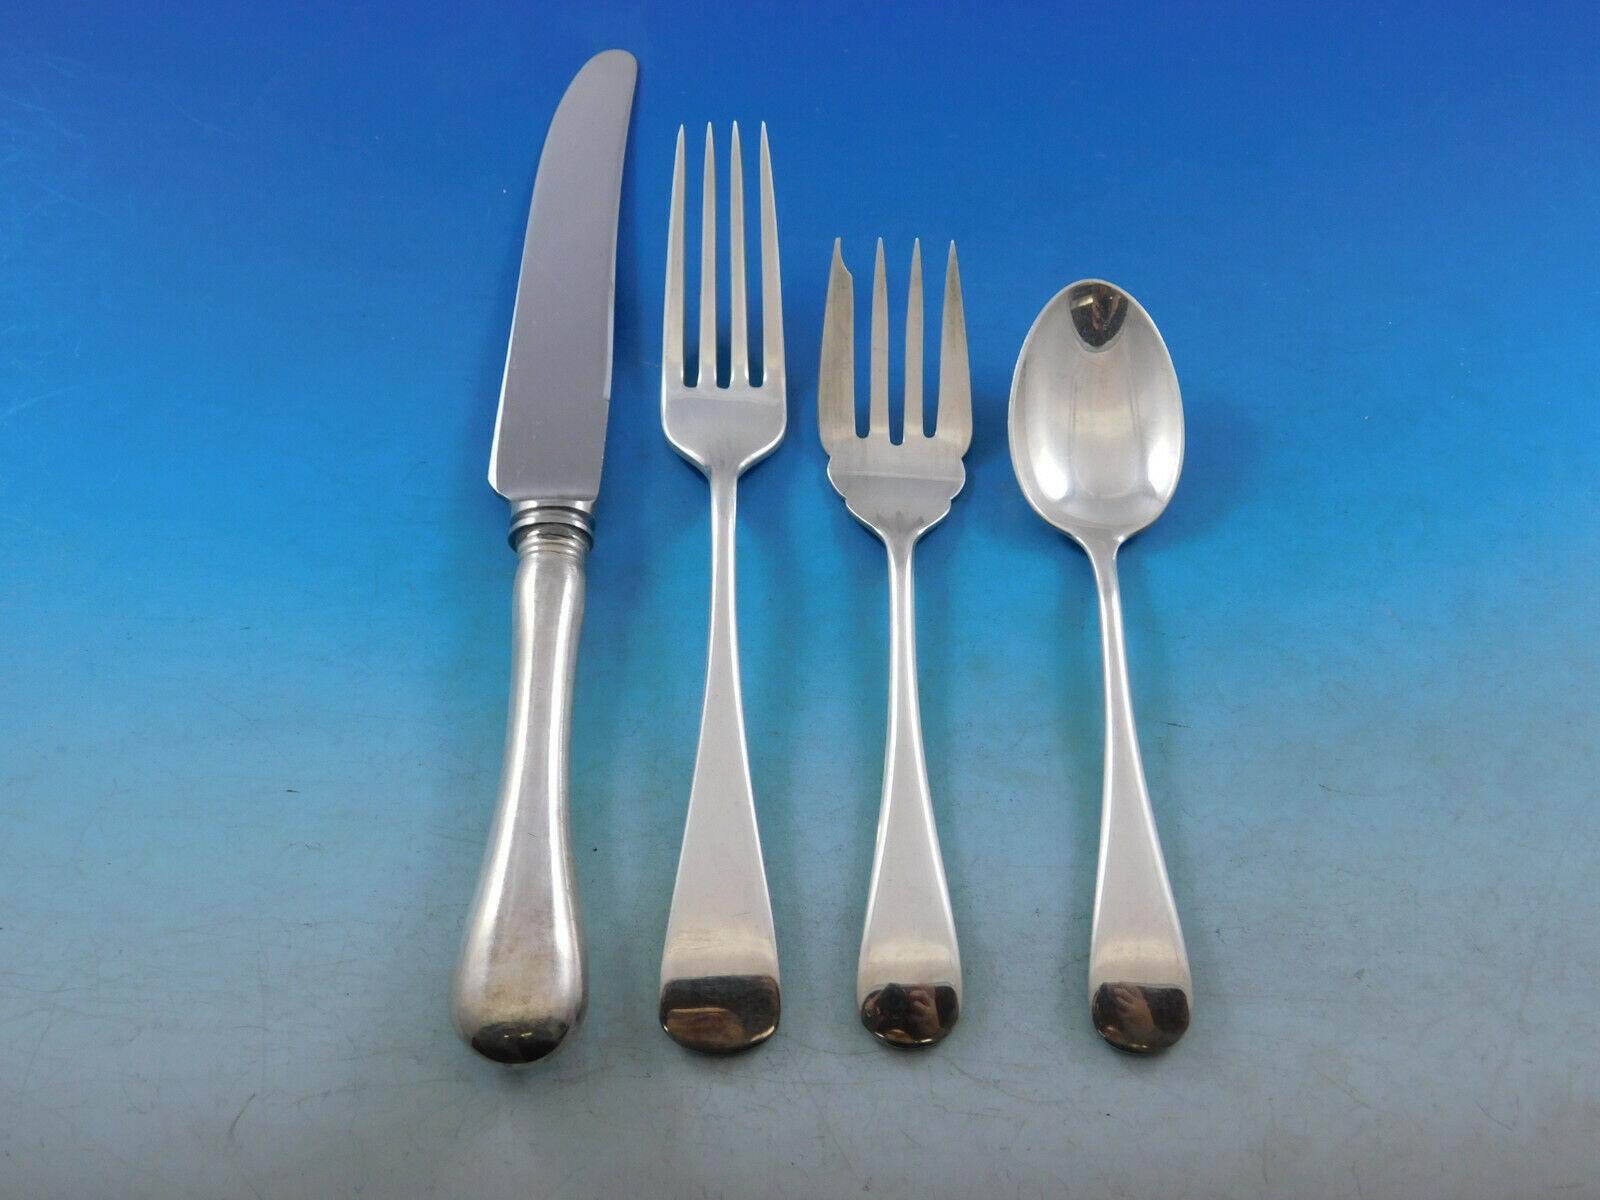 Classic unadorned, plain and heavy pattern Old English by Birks Regency Canada sterling silver huge dinner and luncheon flatware set of 60 pieces. This set includes:

Six dinner size knives, 9 1/2